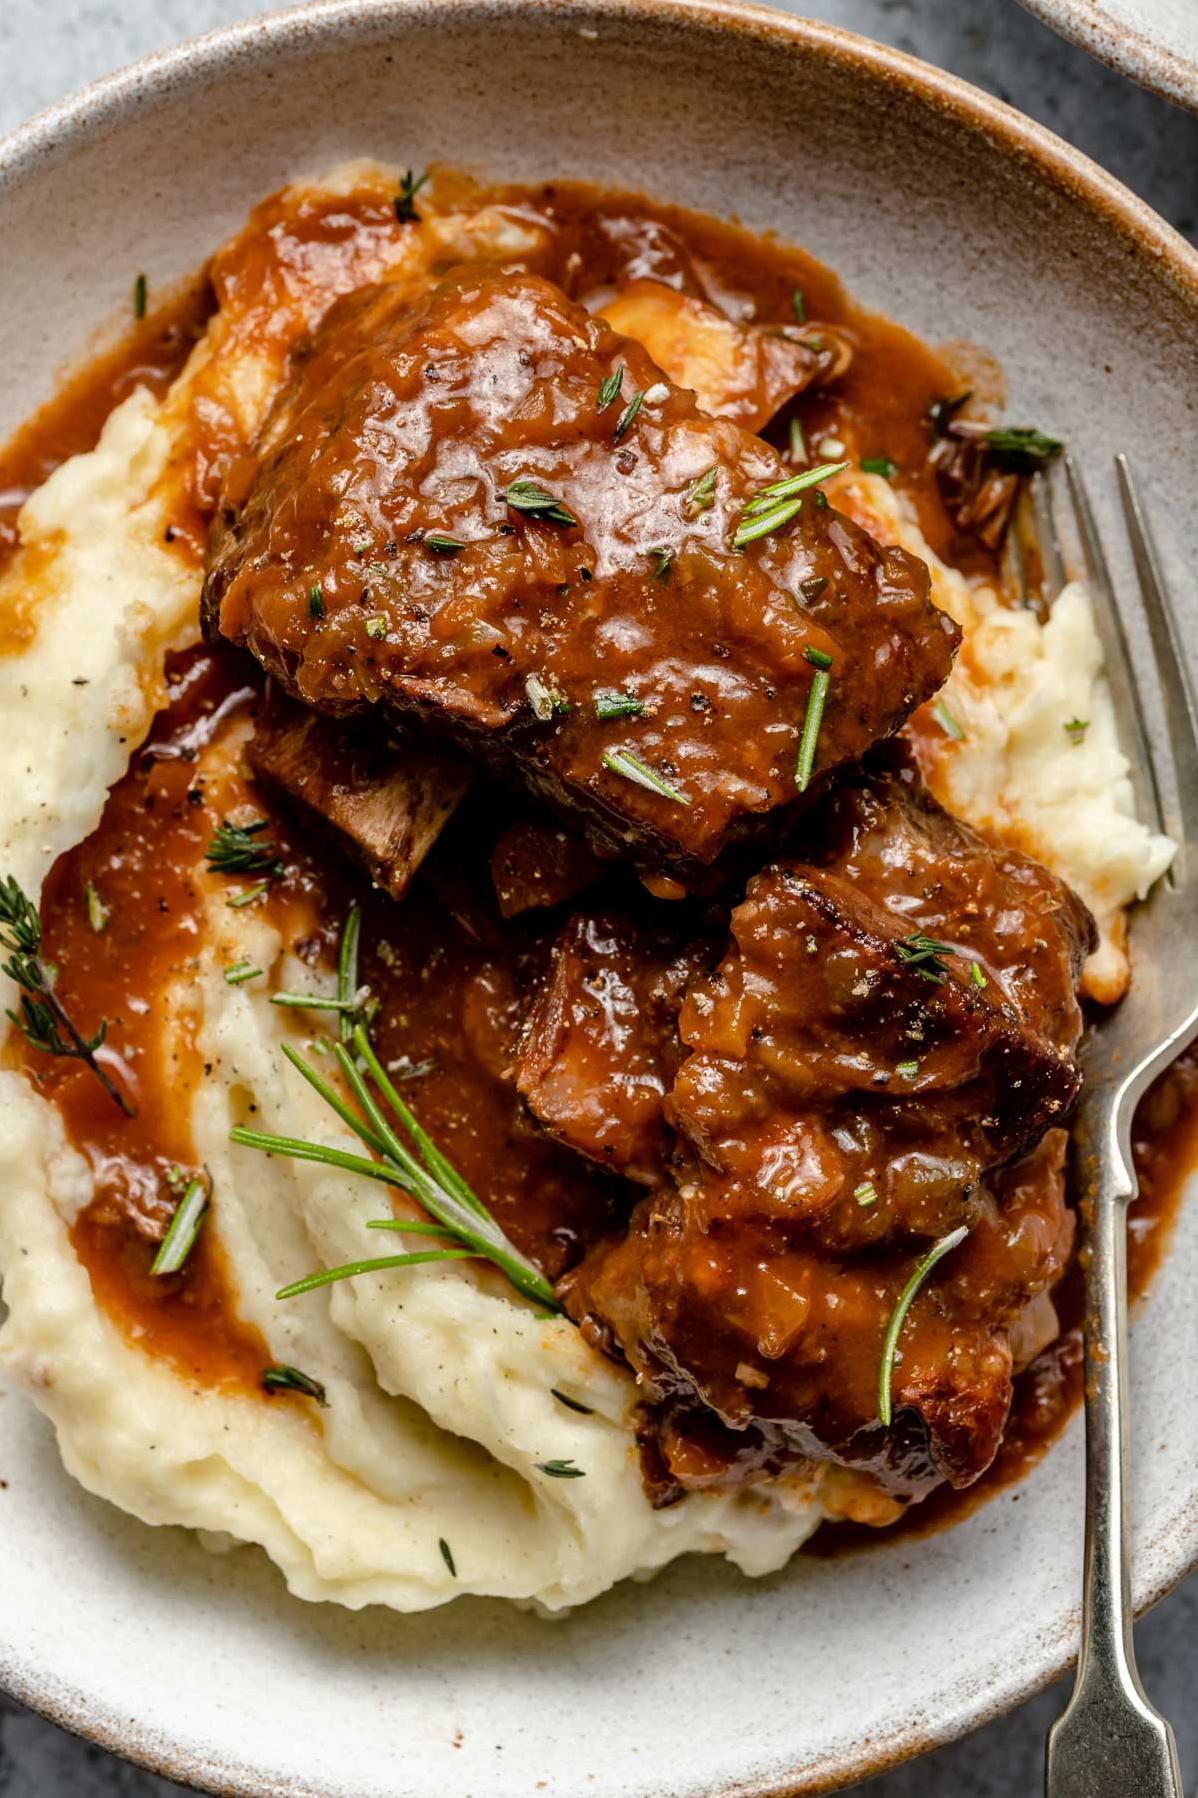  The ultimate comfort dish: Braised Short Ribs in Red Wine